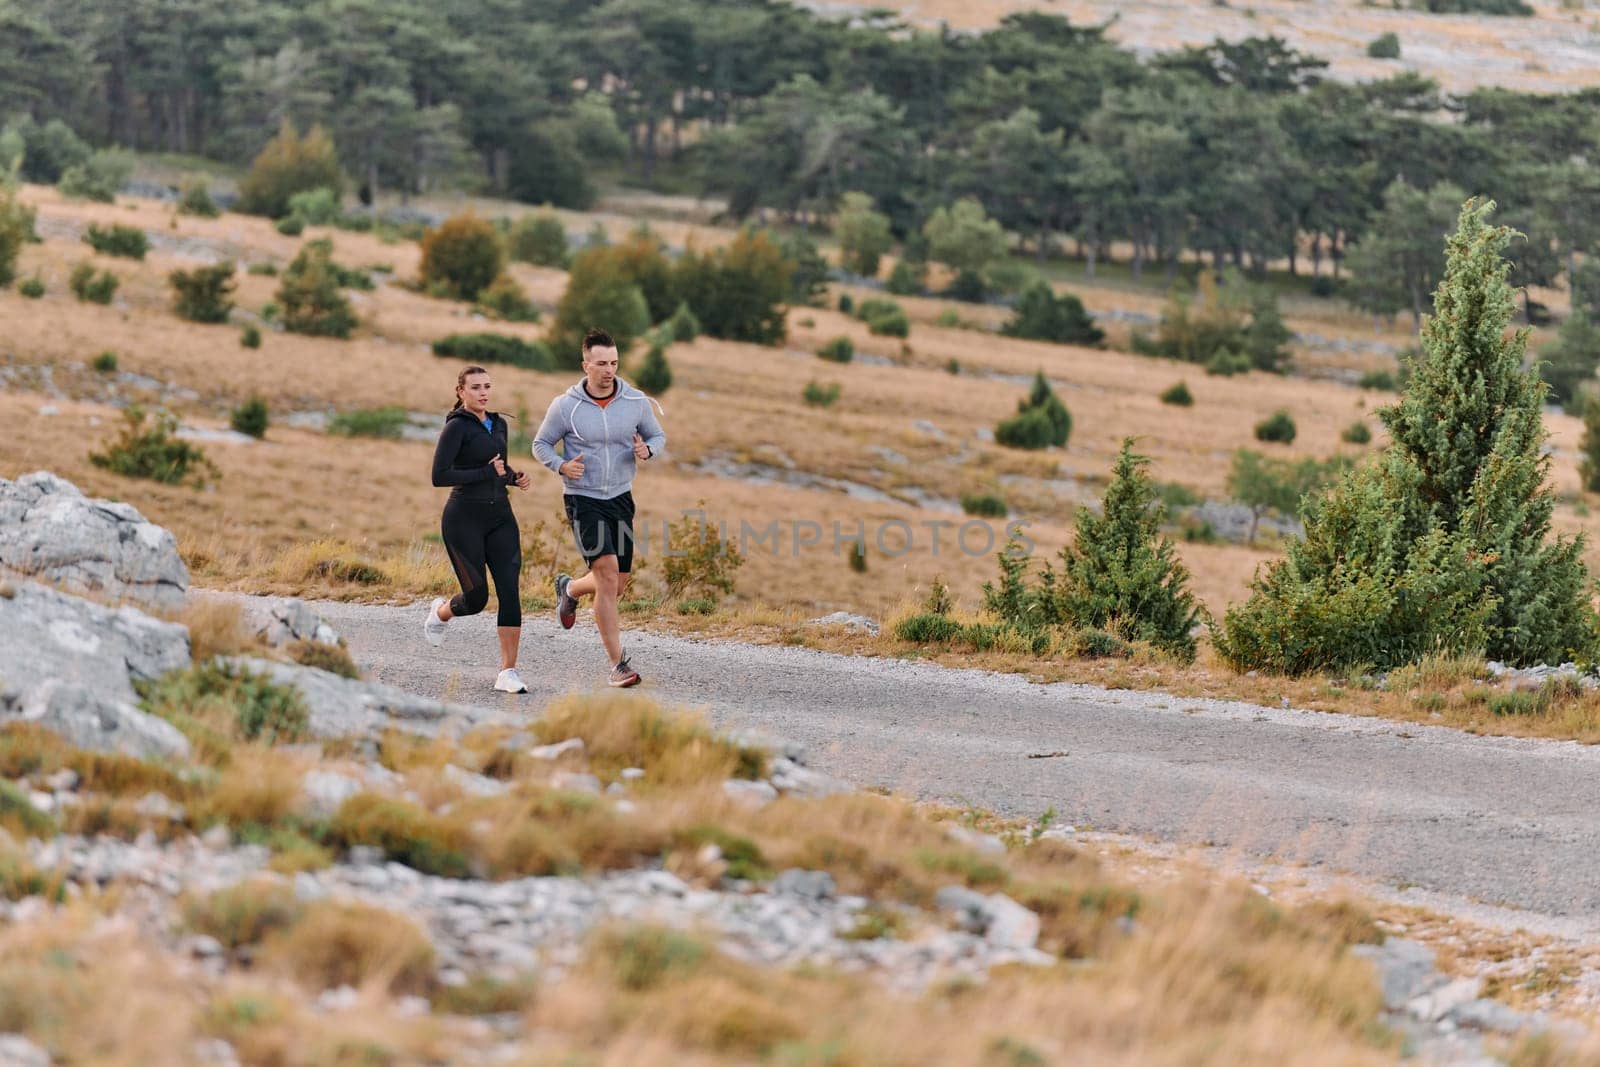 A couple dressed in sportswear runs along a scenic road during an early morning workout, enjoying the fresh air and maintaining a healthy lifestyle by dotshock